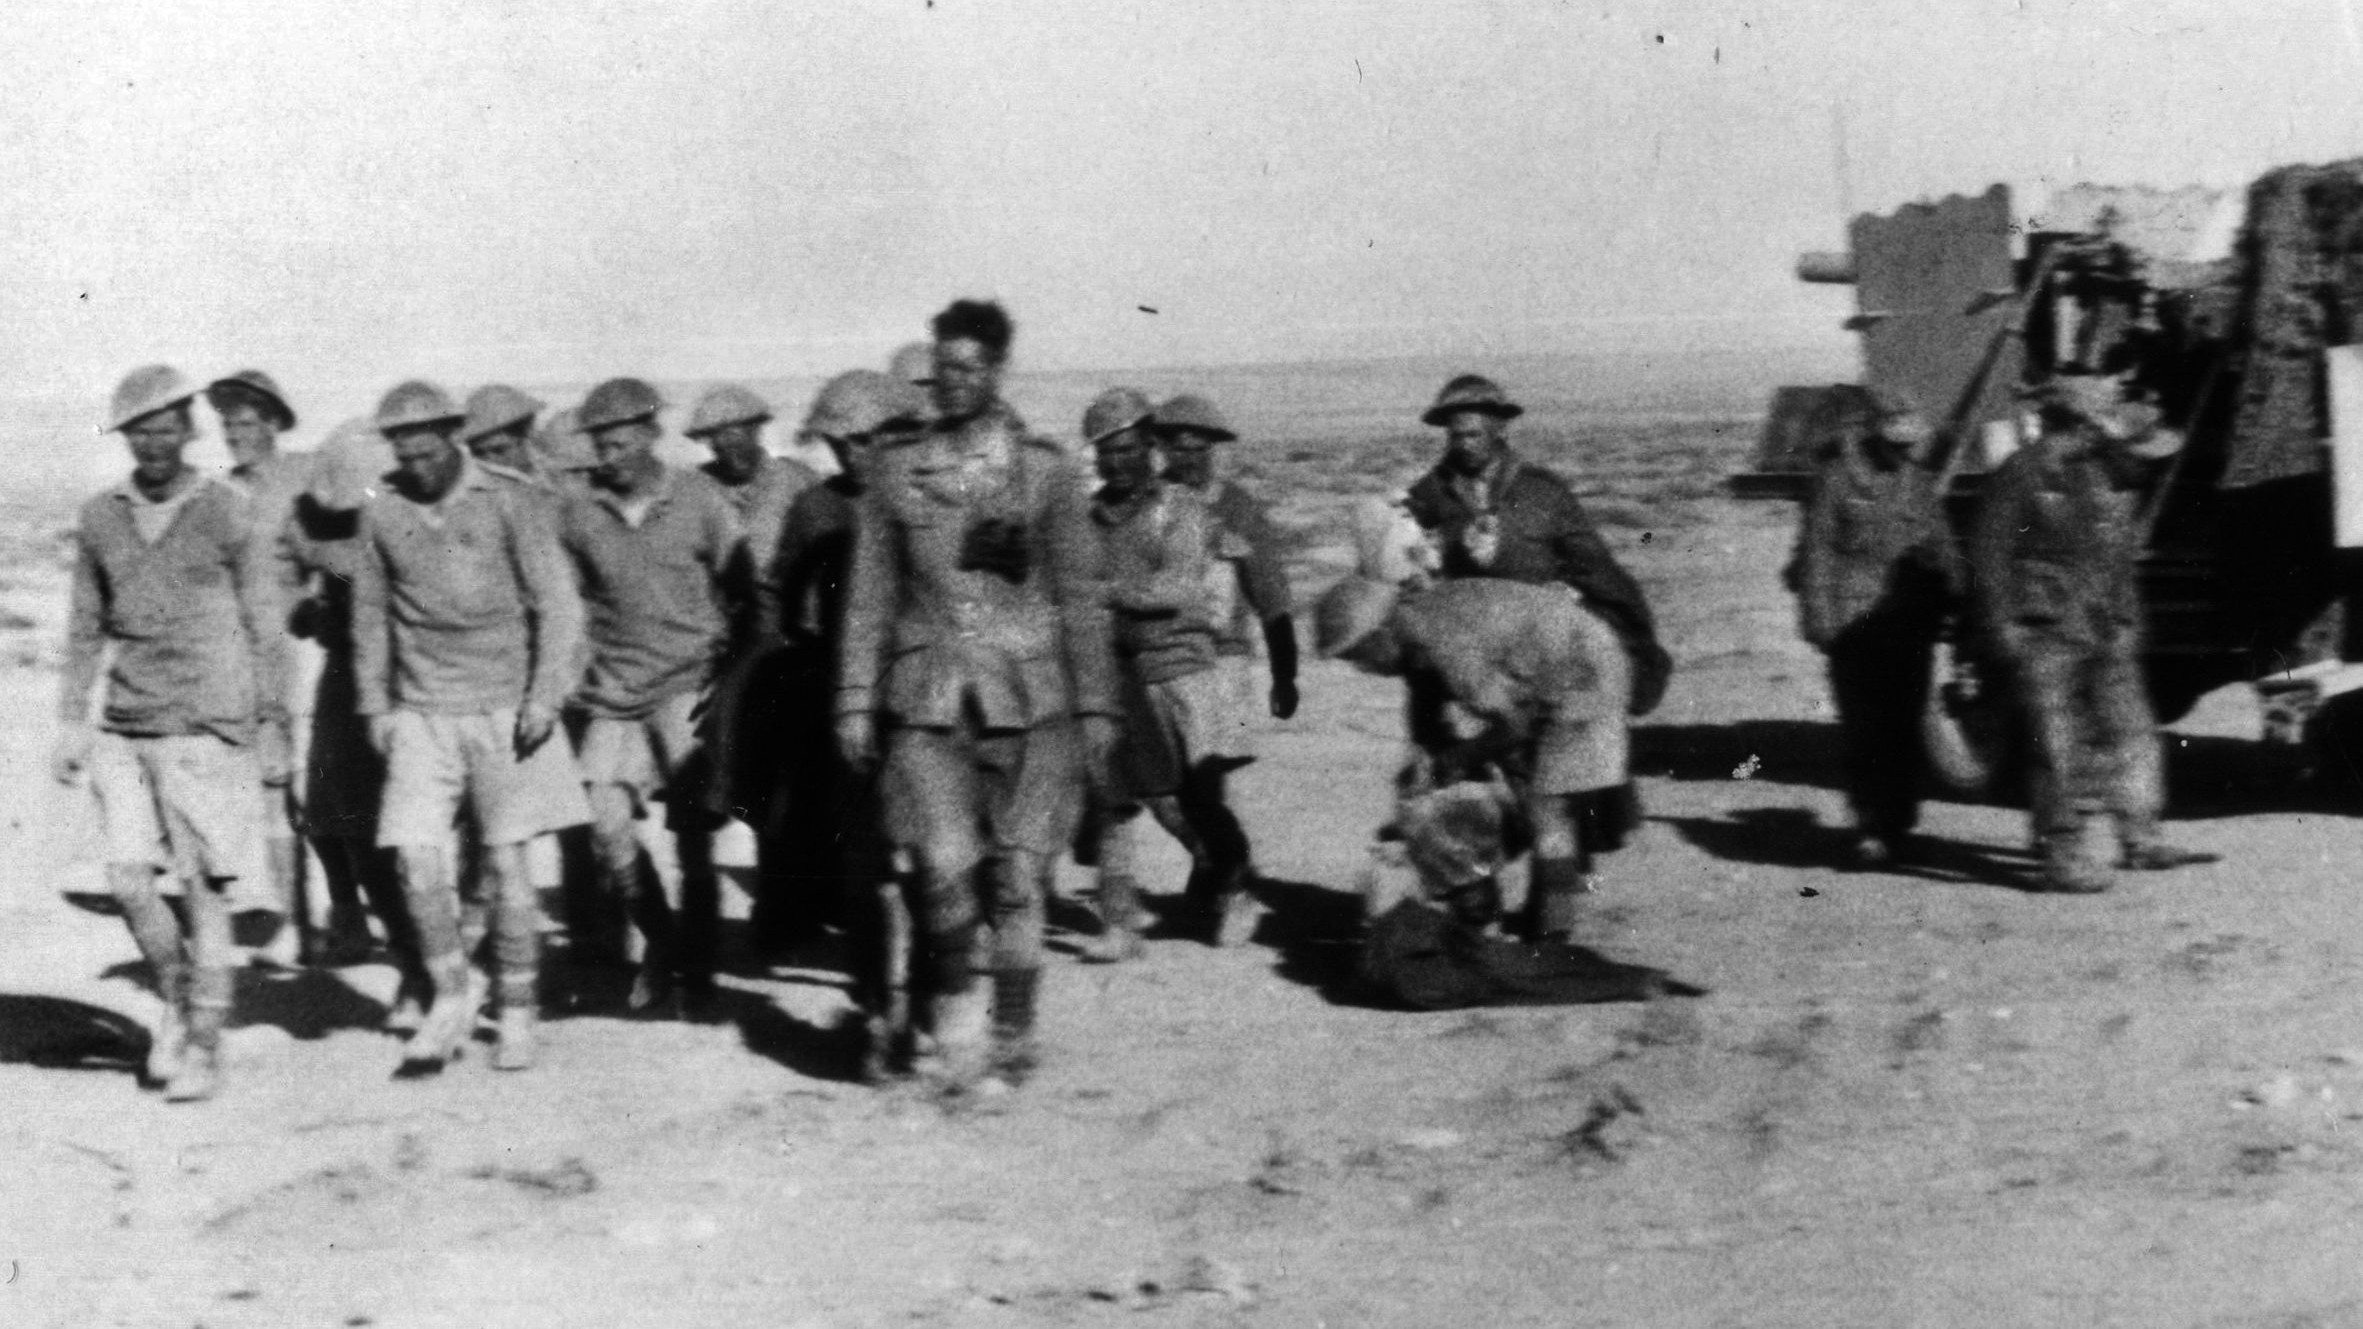 Several still wearing their distinctive helmets, a group of British soldiers taken prisoner following a defeat at the hands of the German Afrika Korps marches toward captivity. 